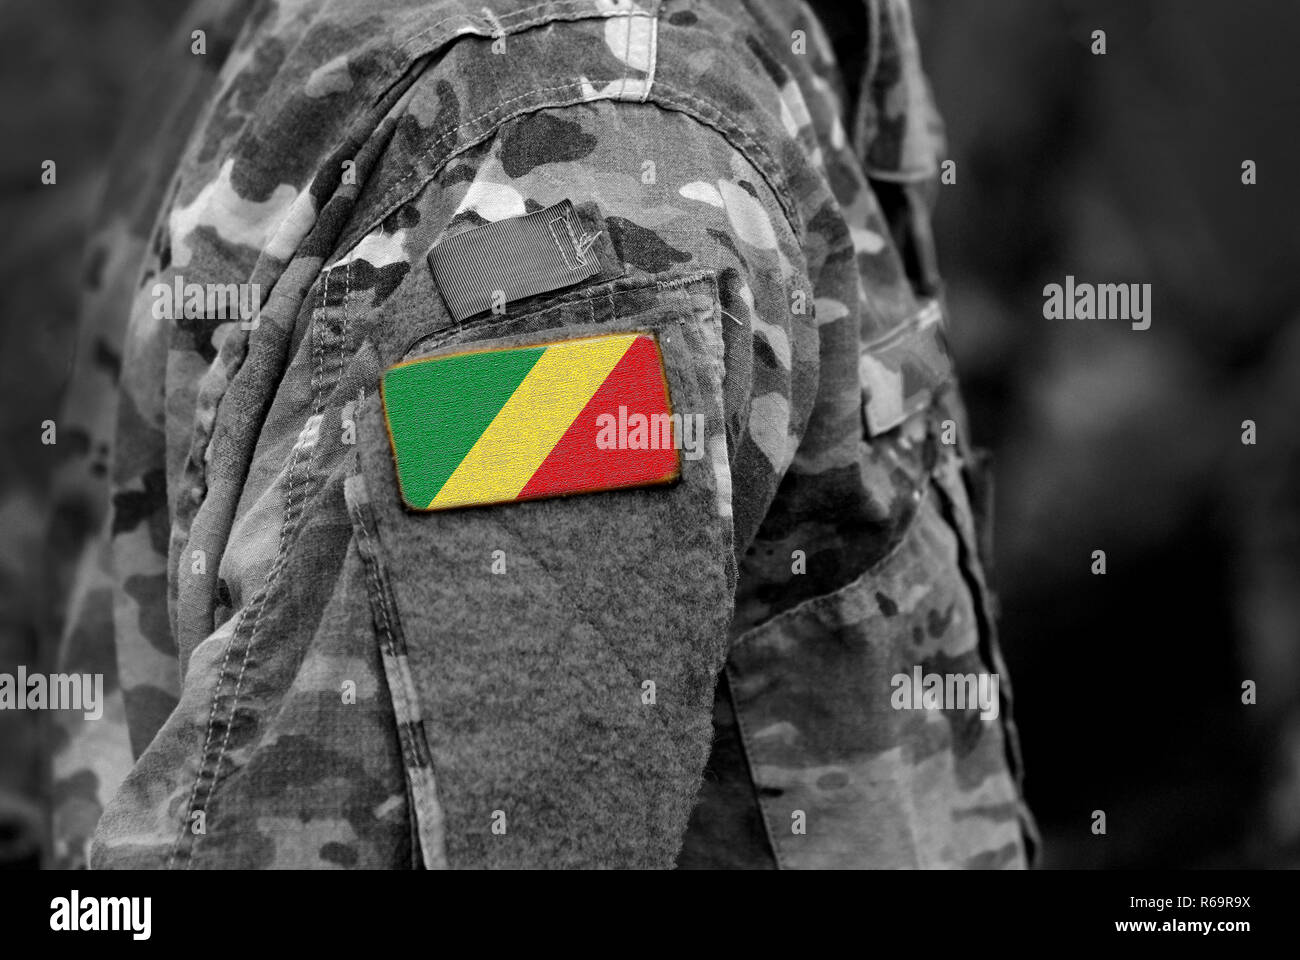 Flag of Congo on soldiers arm. Army, troops, military, Africa (collage). Stock Photo